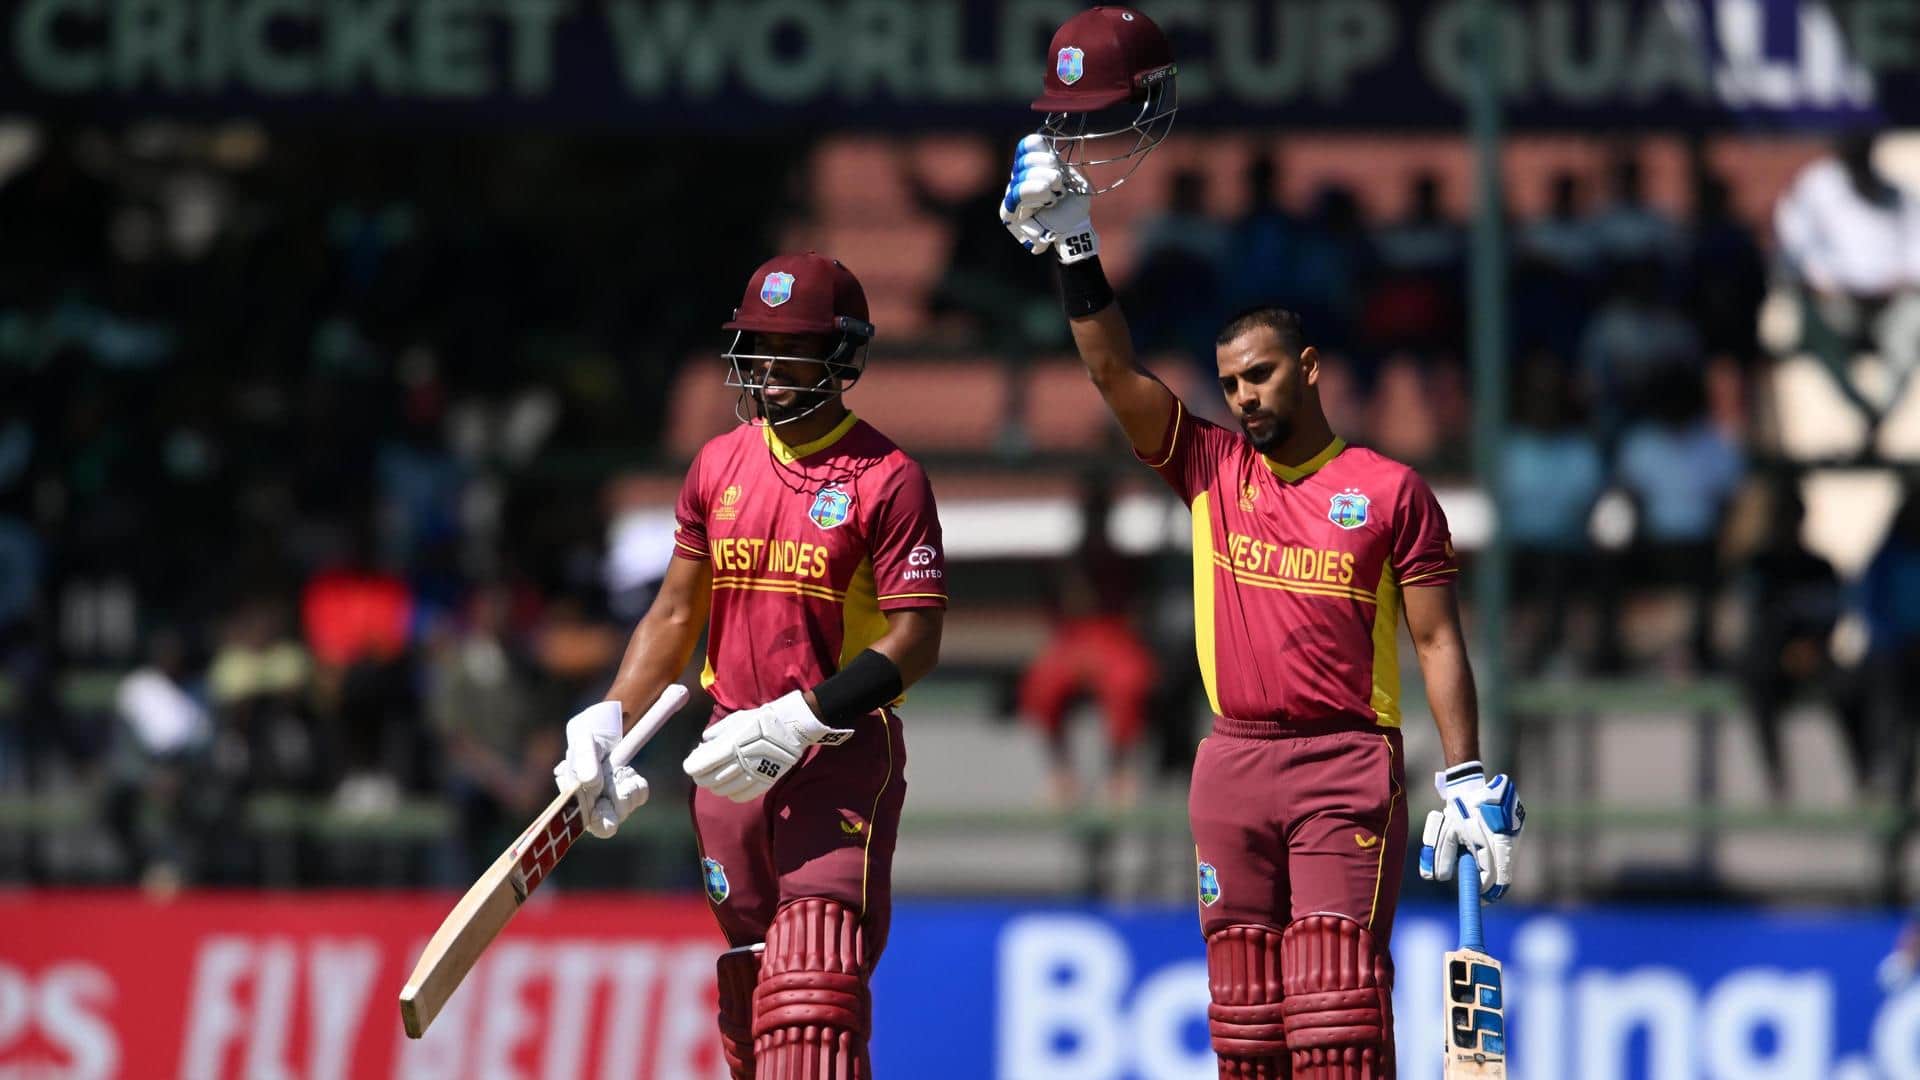 Cricket World Cup Qualifiers, West Indies thrash Nepal: Key stats